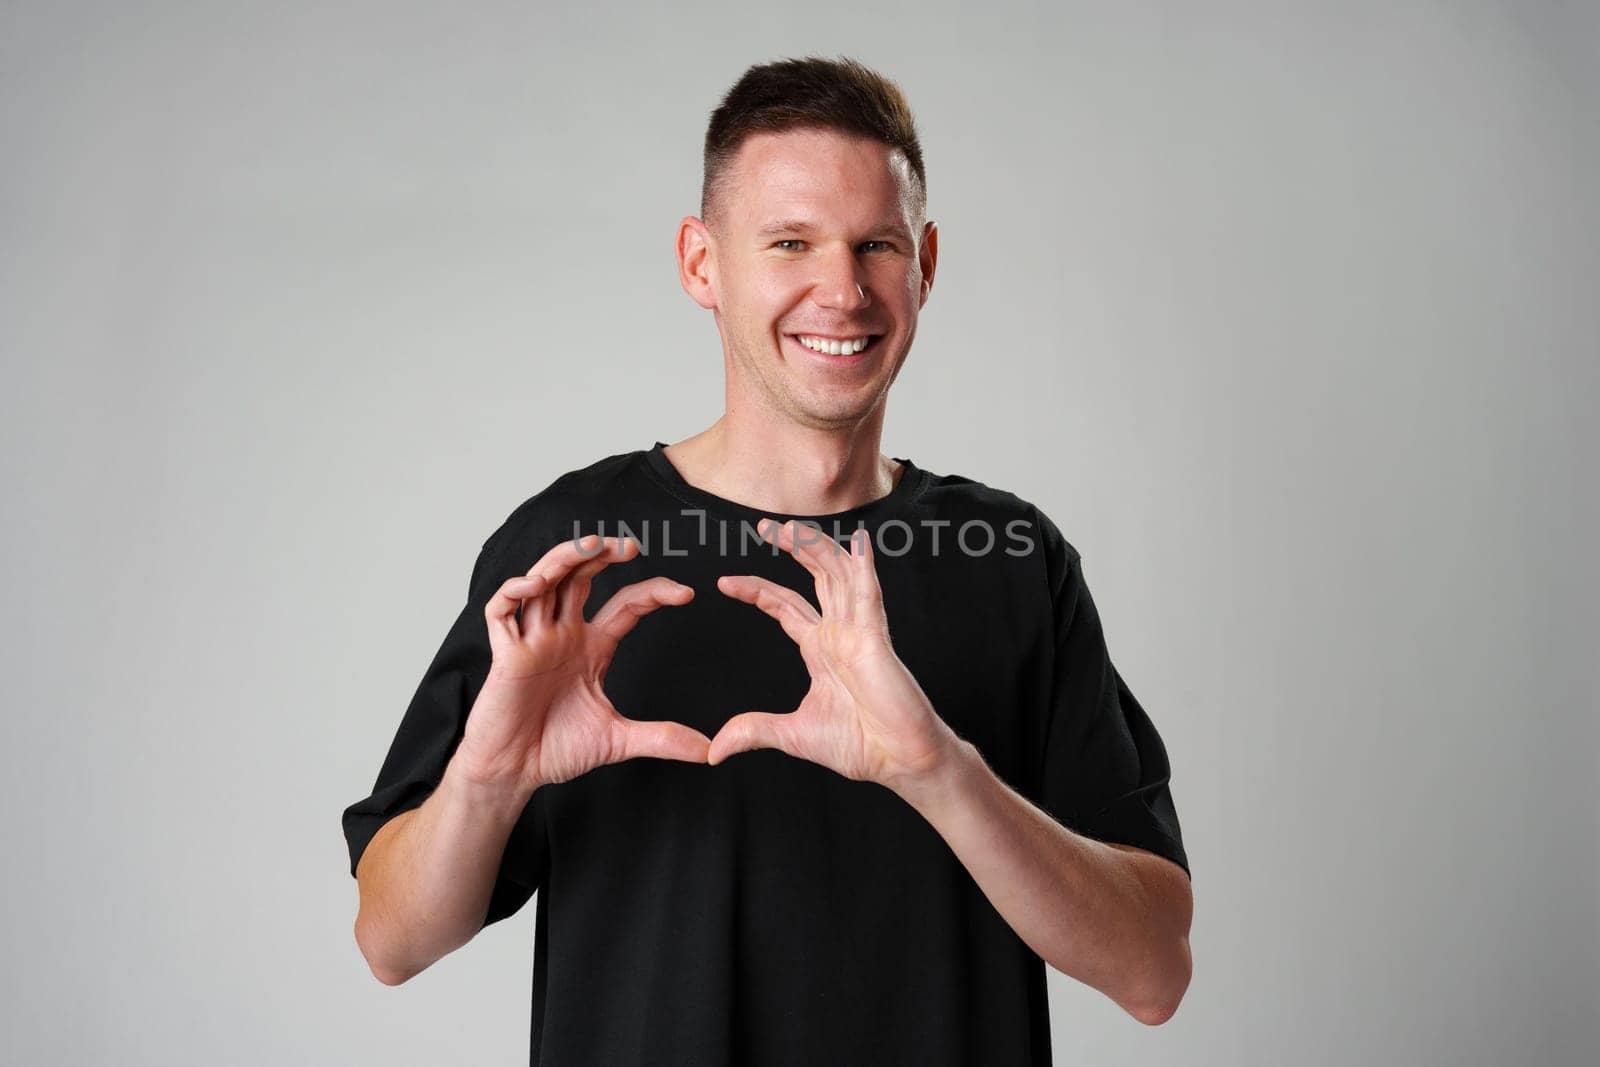 Smiling young man gesturing heart sign with ahnds against gray background close up